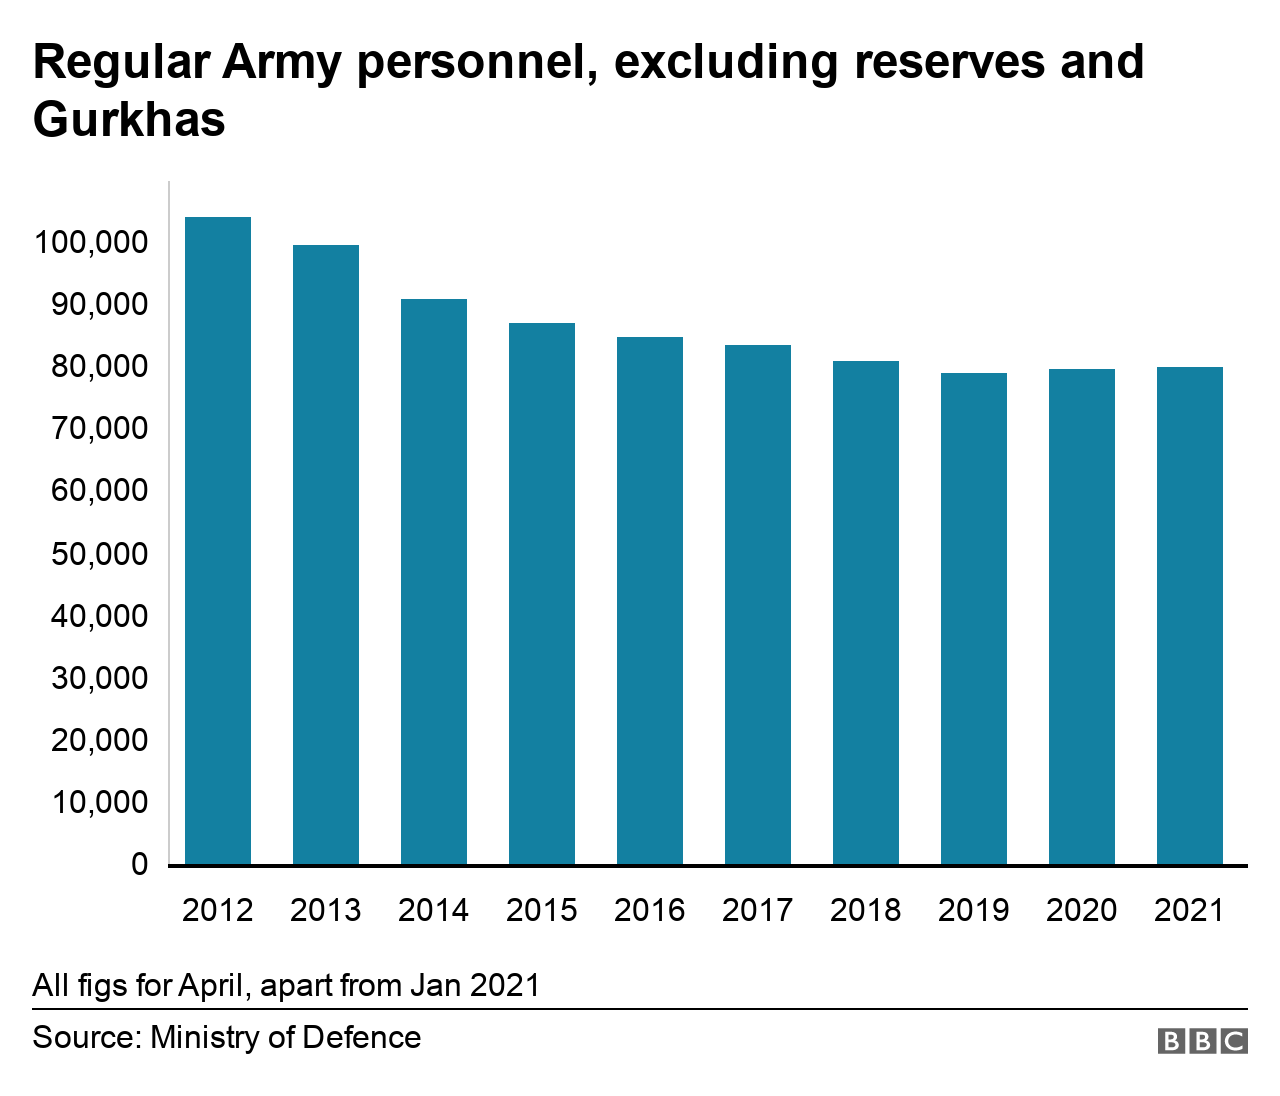 Full-time army personnel has fallen steadily over the past decade